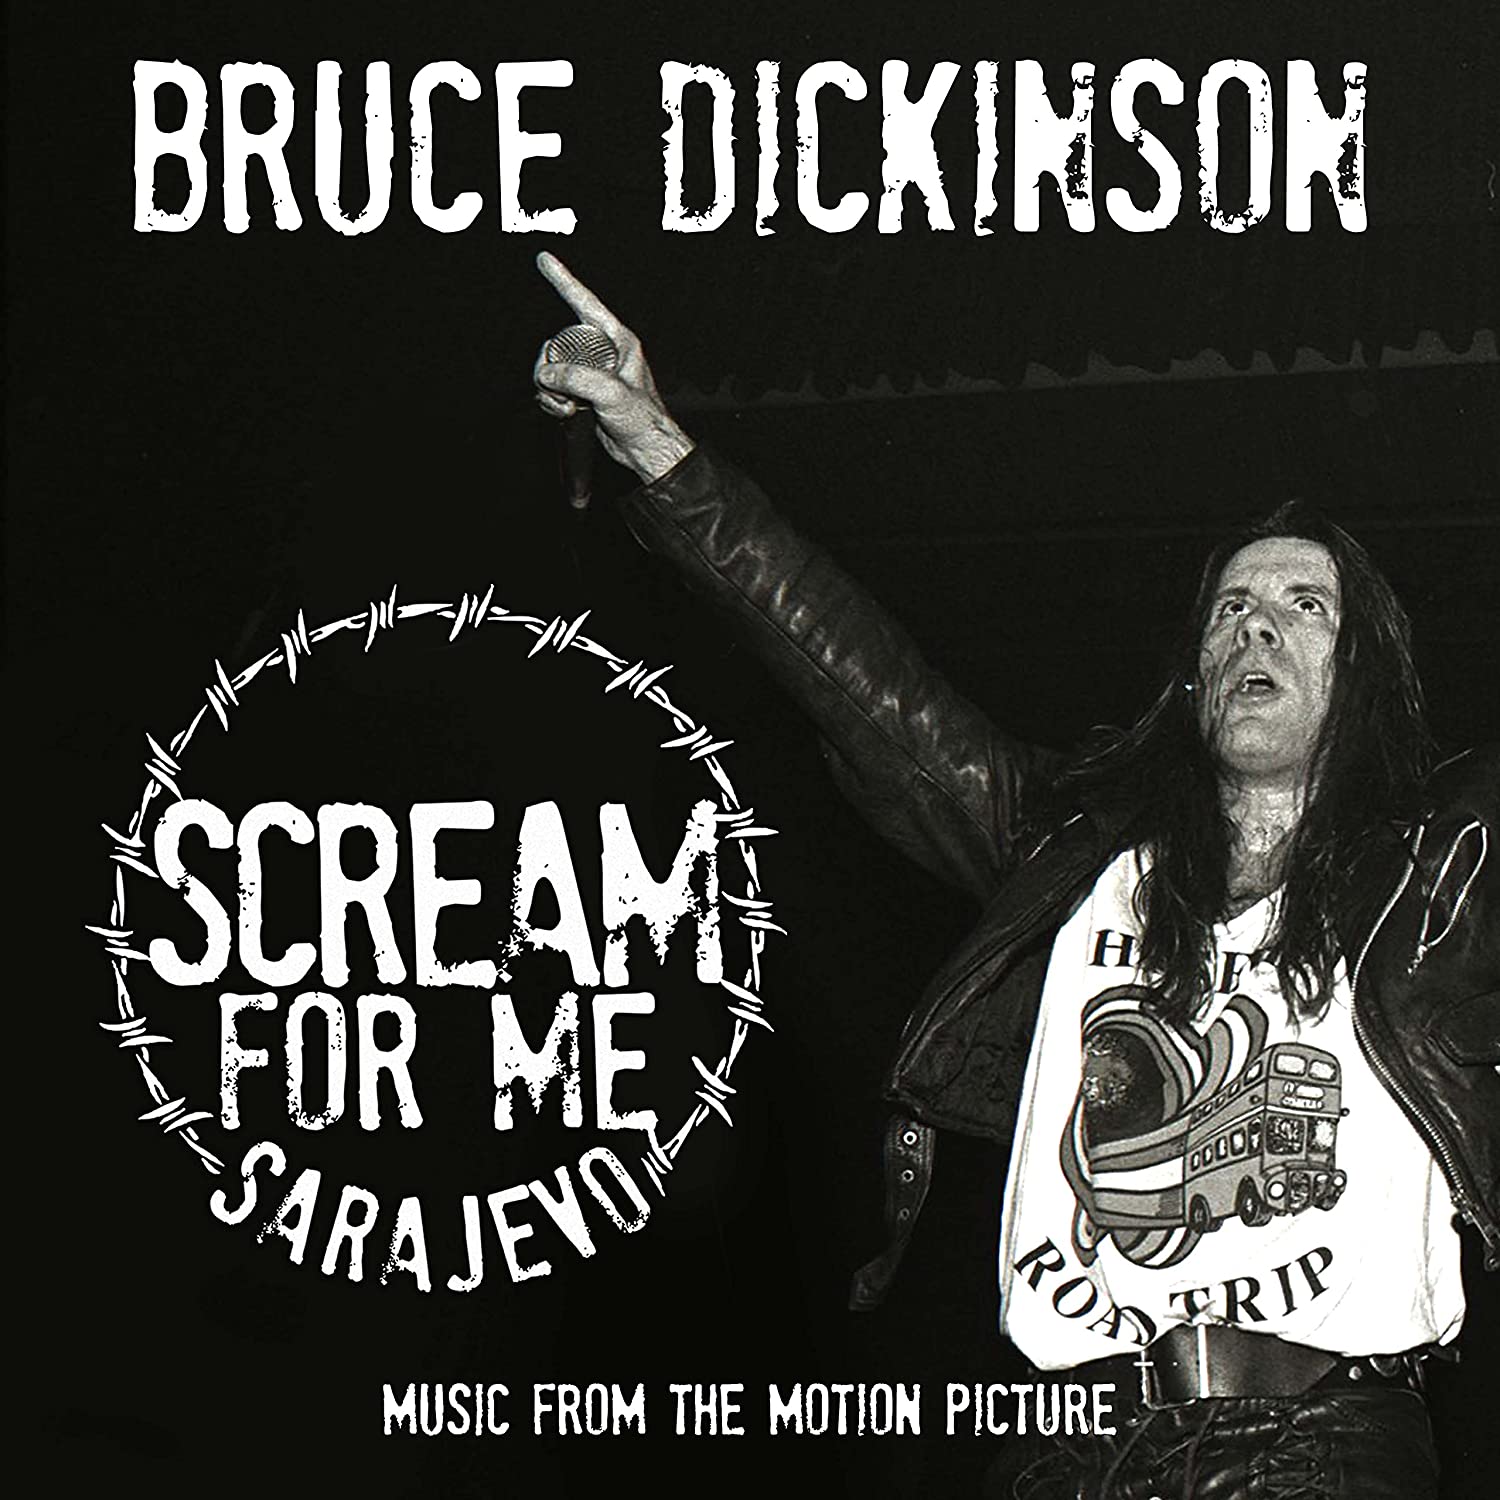 BRUCE DICKINSON - Scream for Me Sarajevo: Music from the Motion Picture cover 